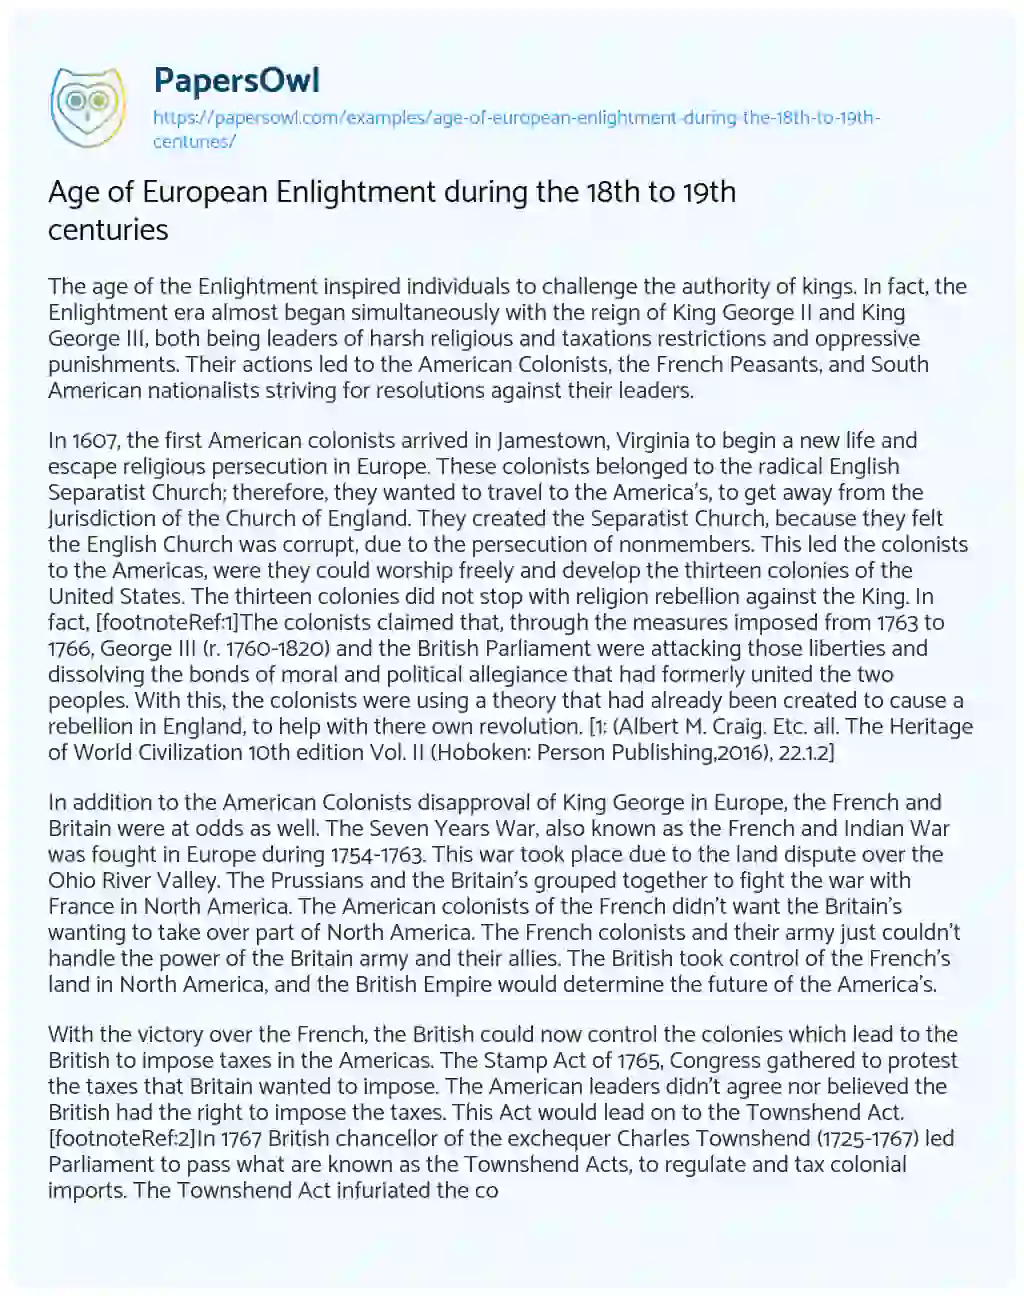 Age of European Enlightment during the 18th to 19th Centuries essay